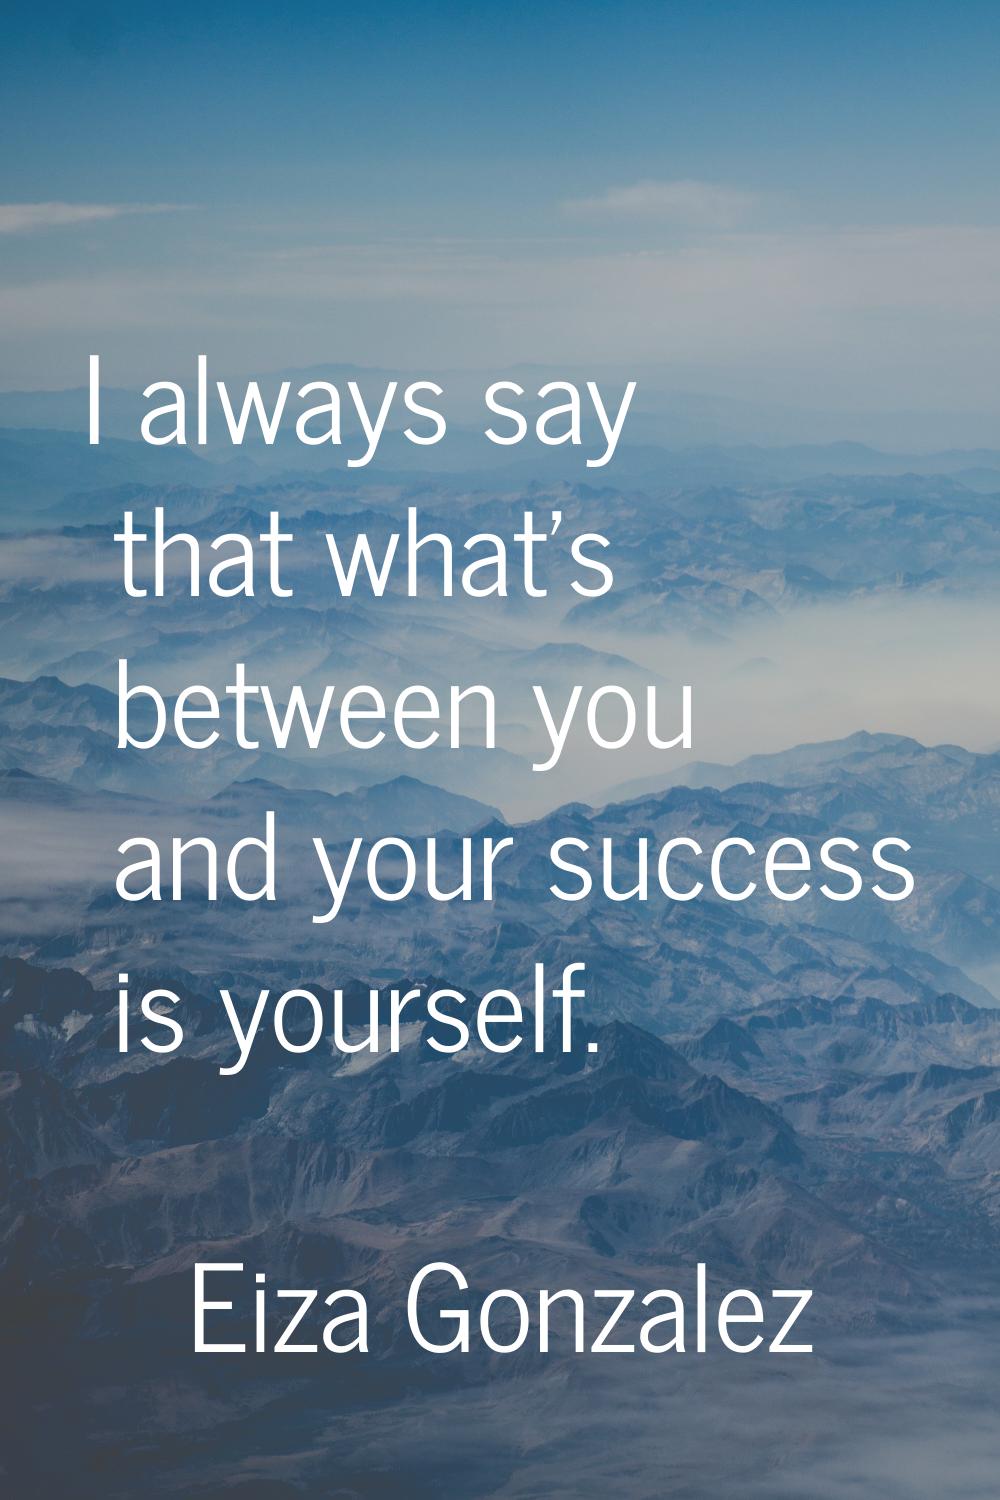 I always say that what's between you and your success is yourself.